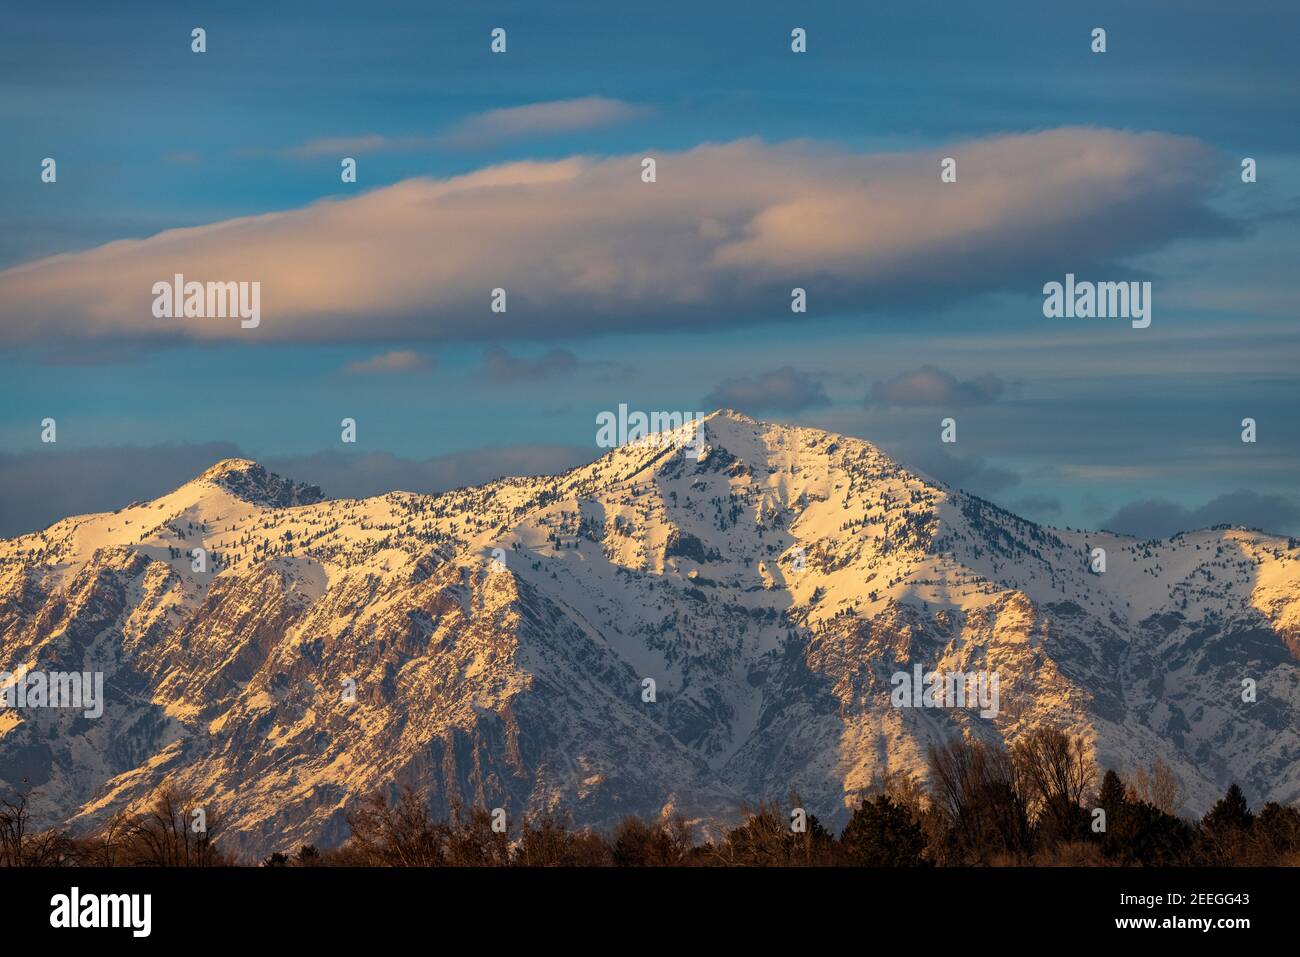 This is a late afternoon view of snow-covered Mount Ben Lomond of the Wasatch Range, on the north end of Ogden, Weber County, Utah, USA. Stock Photo